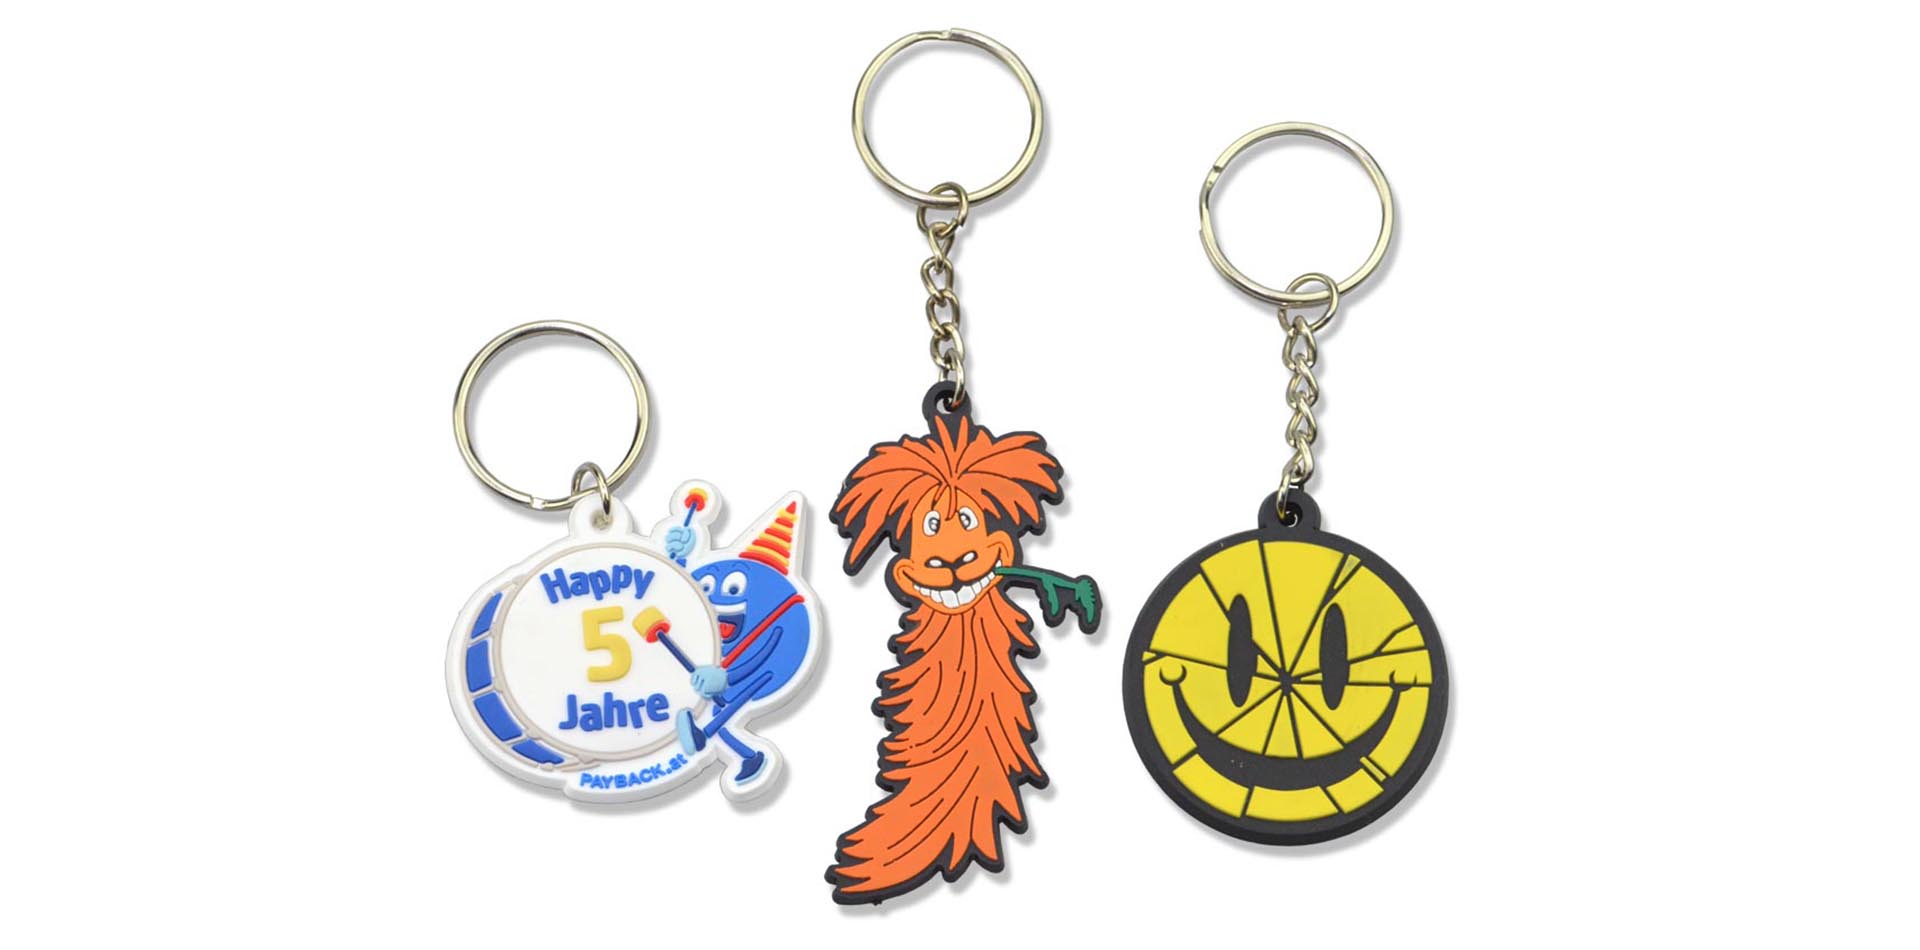 Do you want to customize PVC keychain as a gift? Look over here！